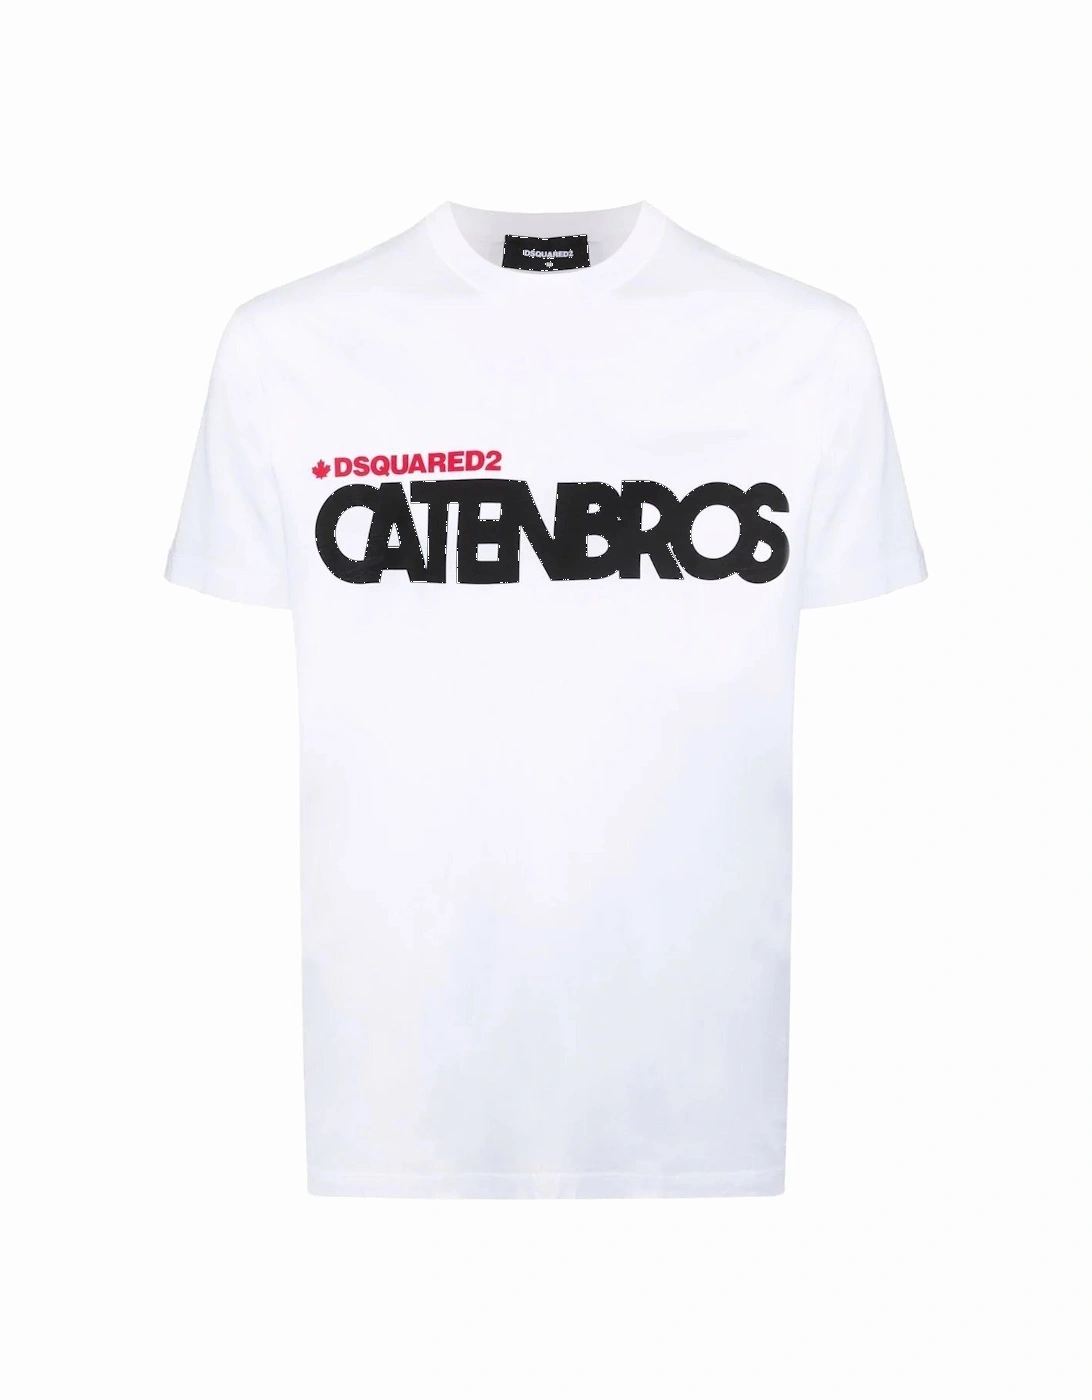 Caten Brothers-print T-shirt in White, 6 of 5